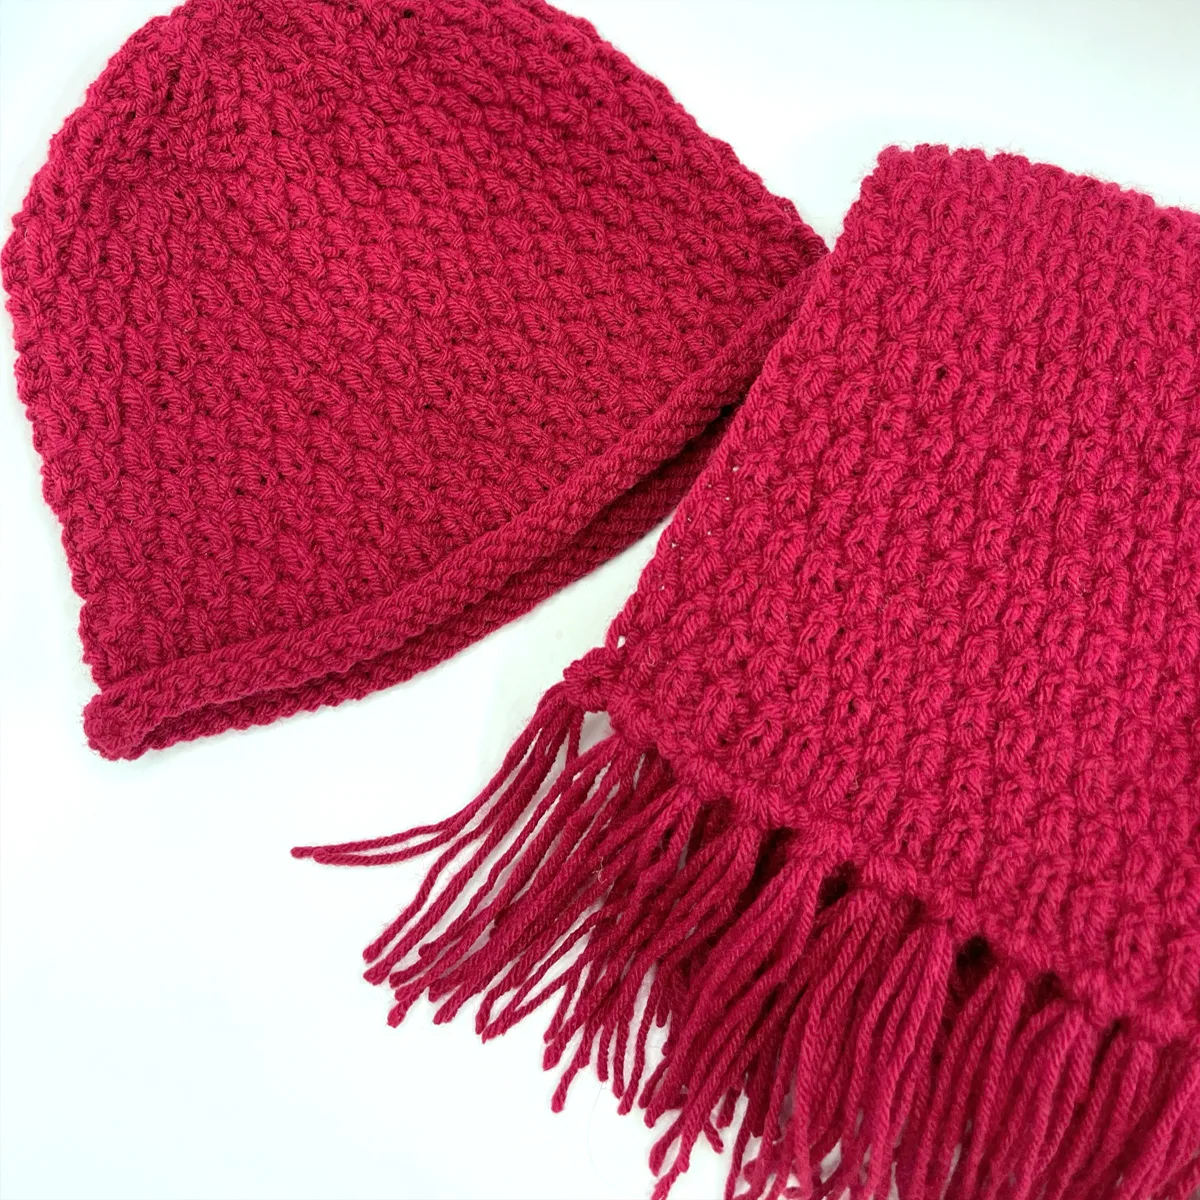 Knitted hat and scarf in burgundy red colored yarn.